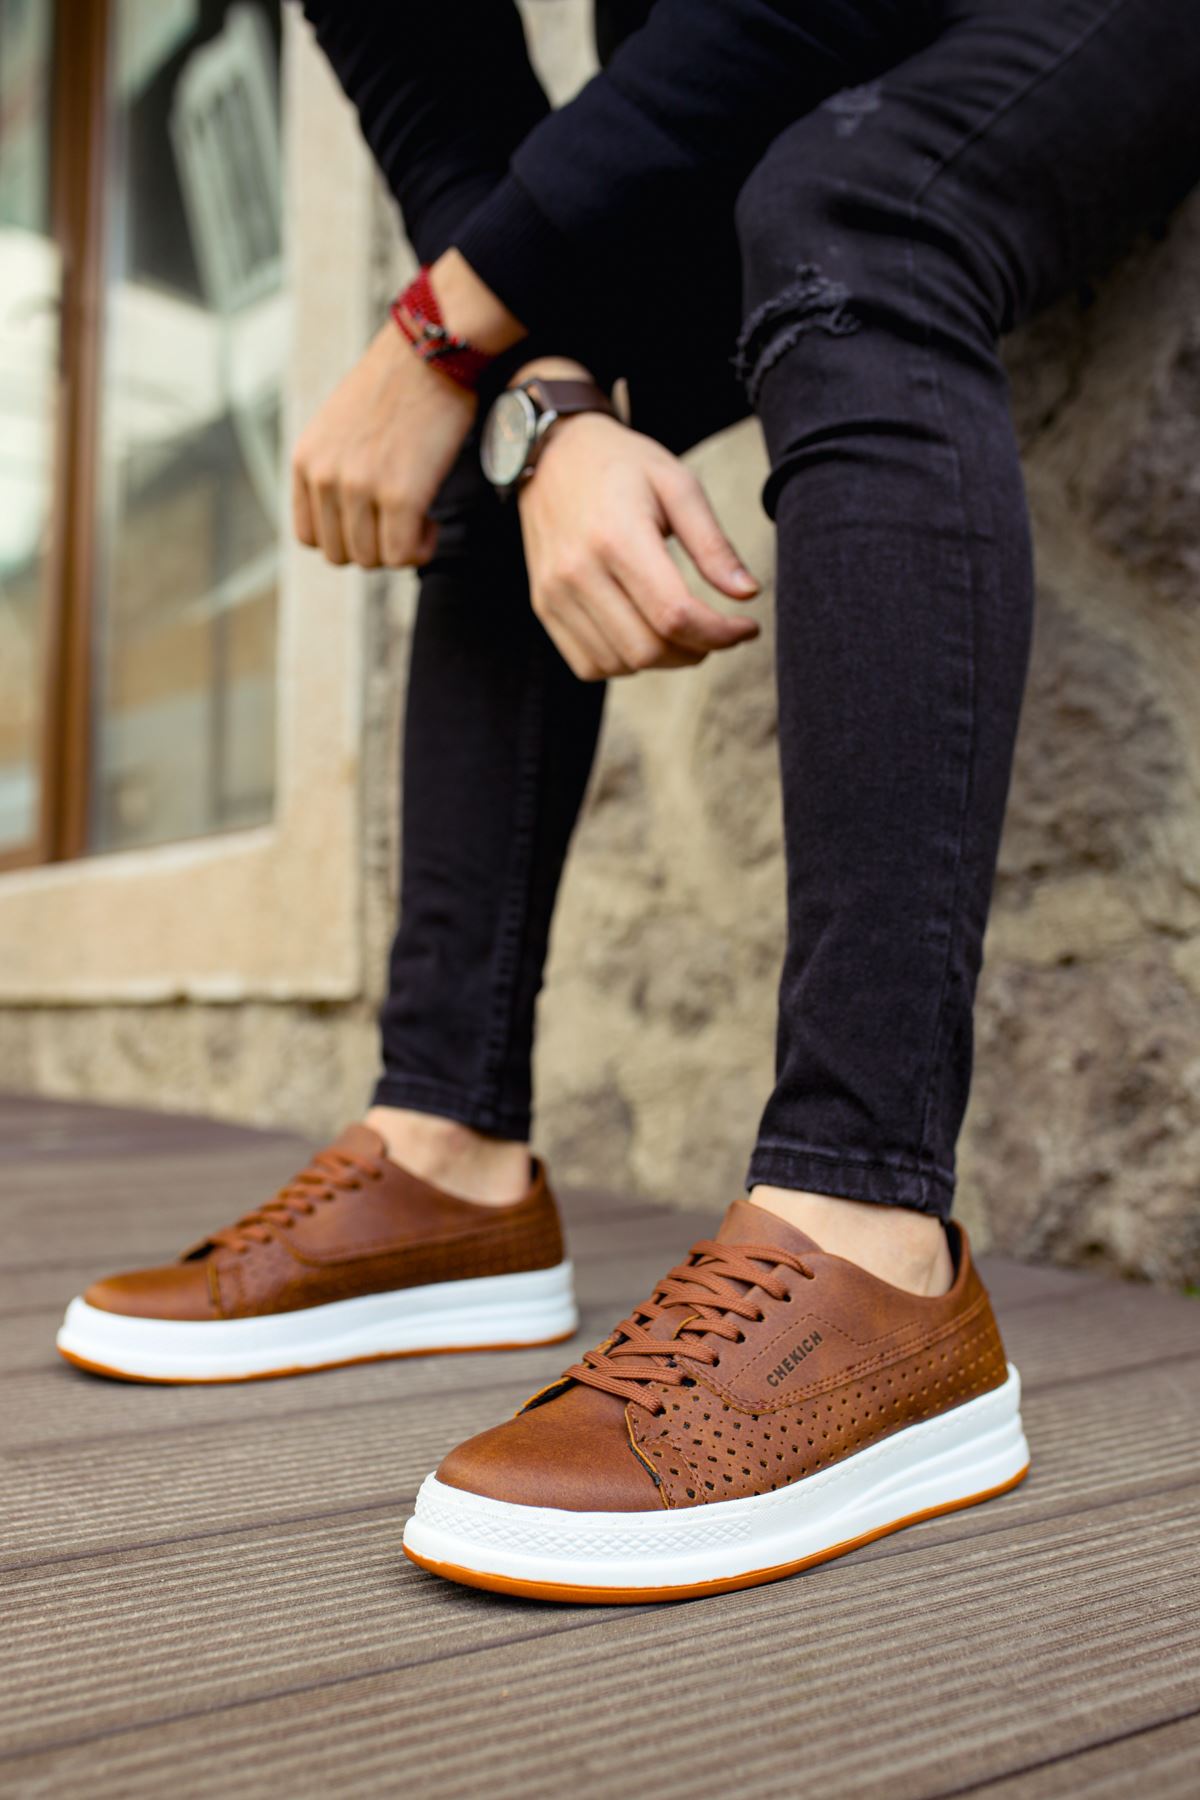 CH043 Men's Unisex Brown-White Sole Casual Shoes - STREETMODE™